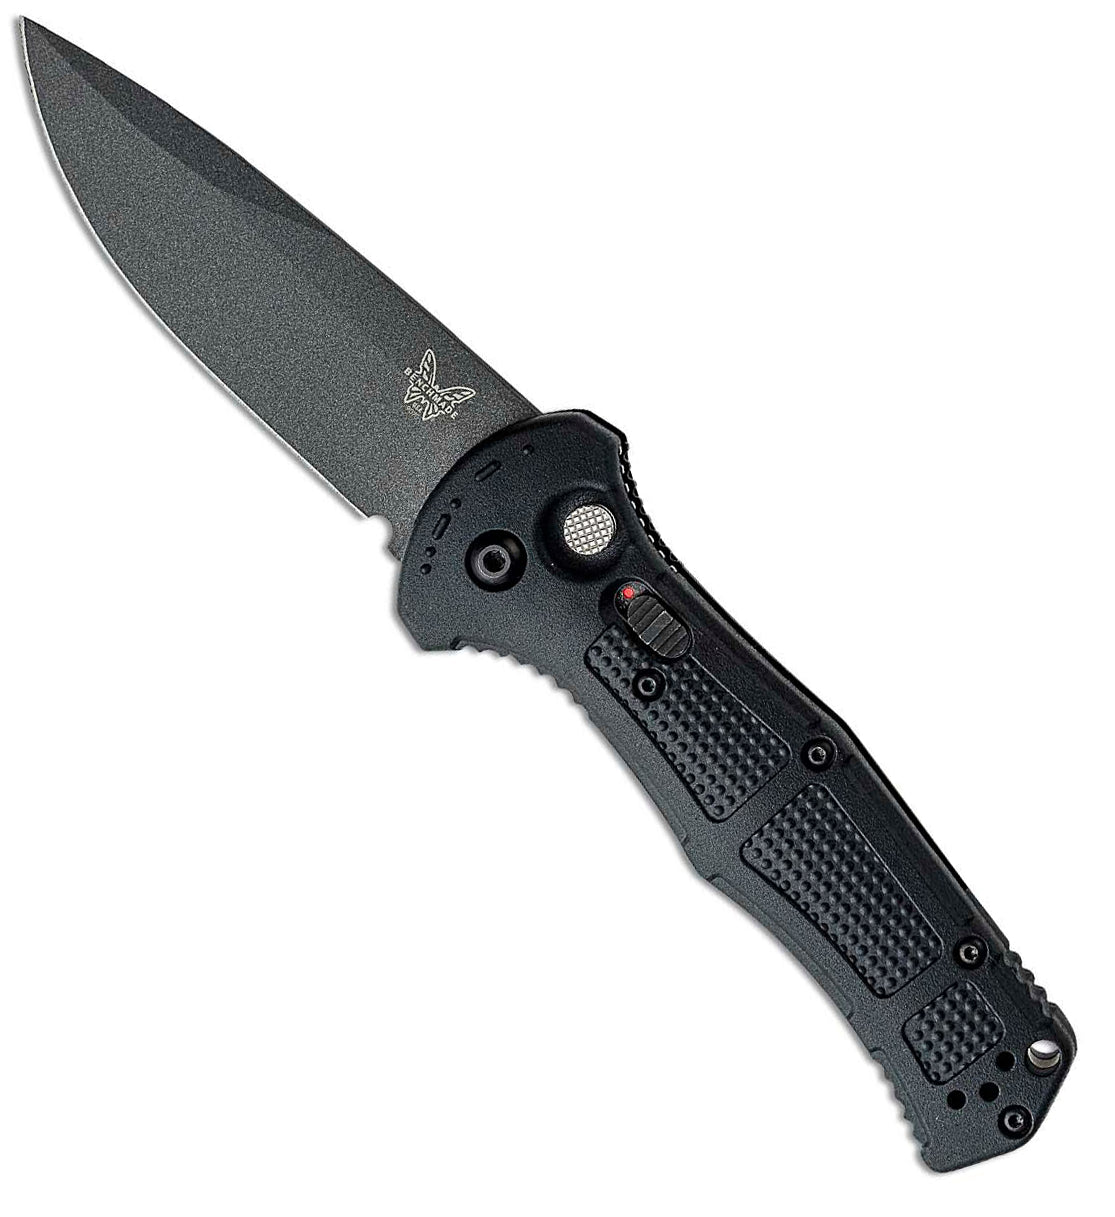 Benchmade Claymore - Automatic - CPM-D2 Blade - Grivory Handle - 9070BK